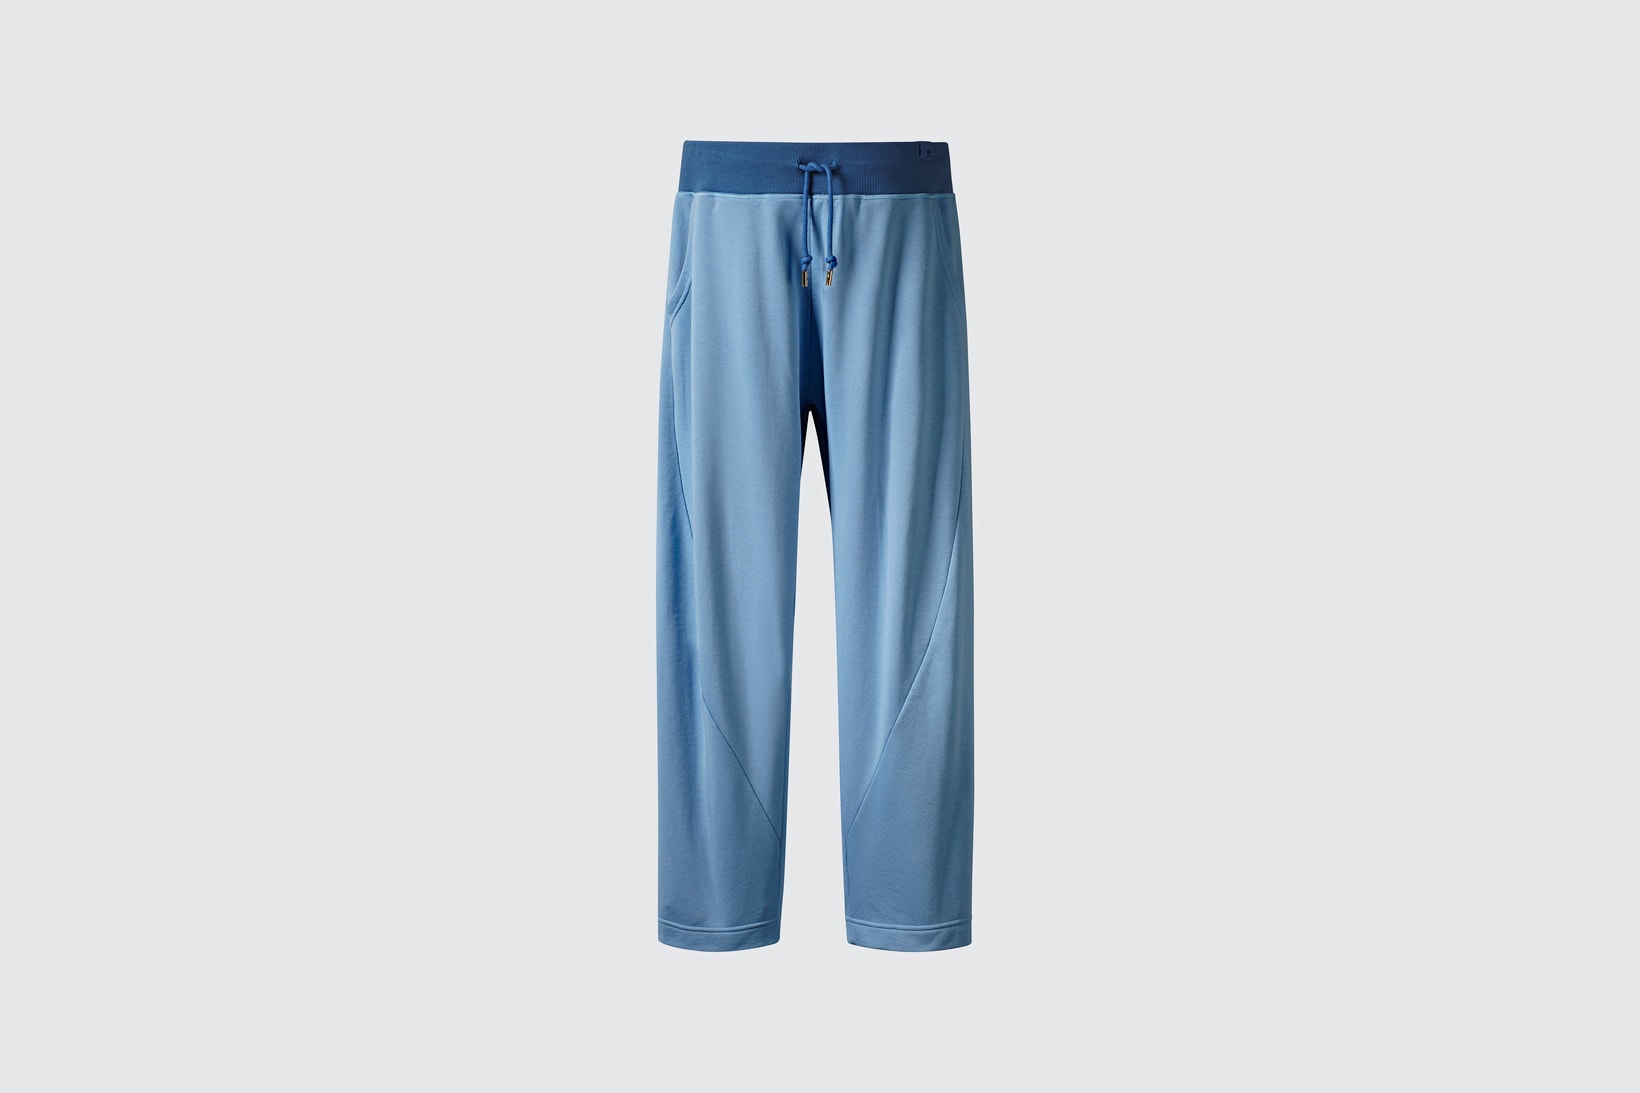 adidas Originals x Oyster Holdings Spring/Summer 2018 Capsule Collection Hooded Sweatpant Blue